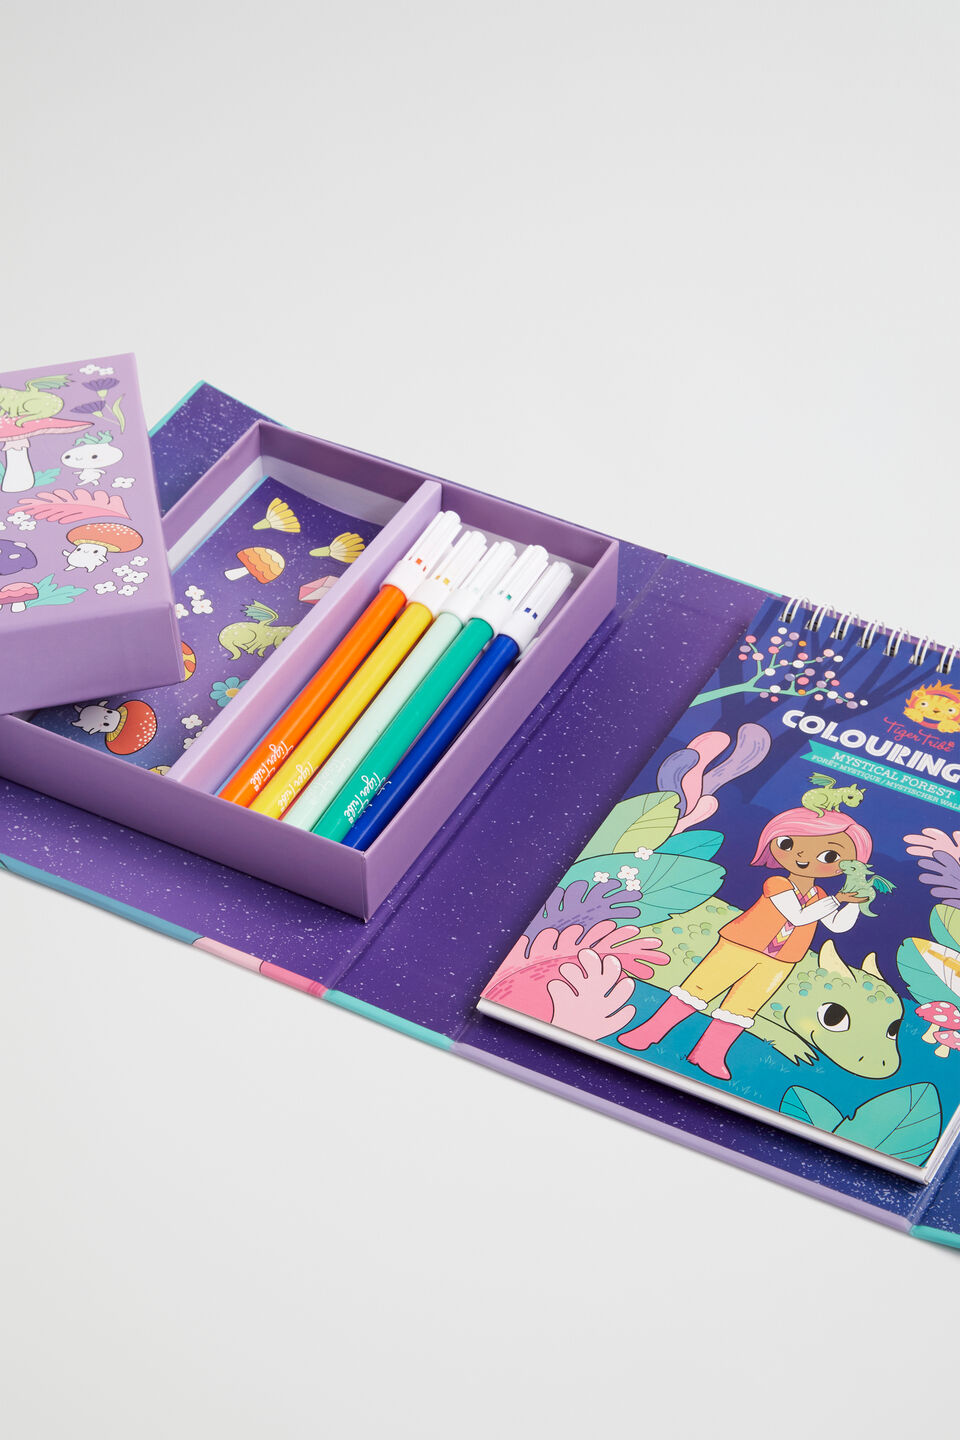 Mystical Forest Colouring Set  Multi